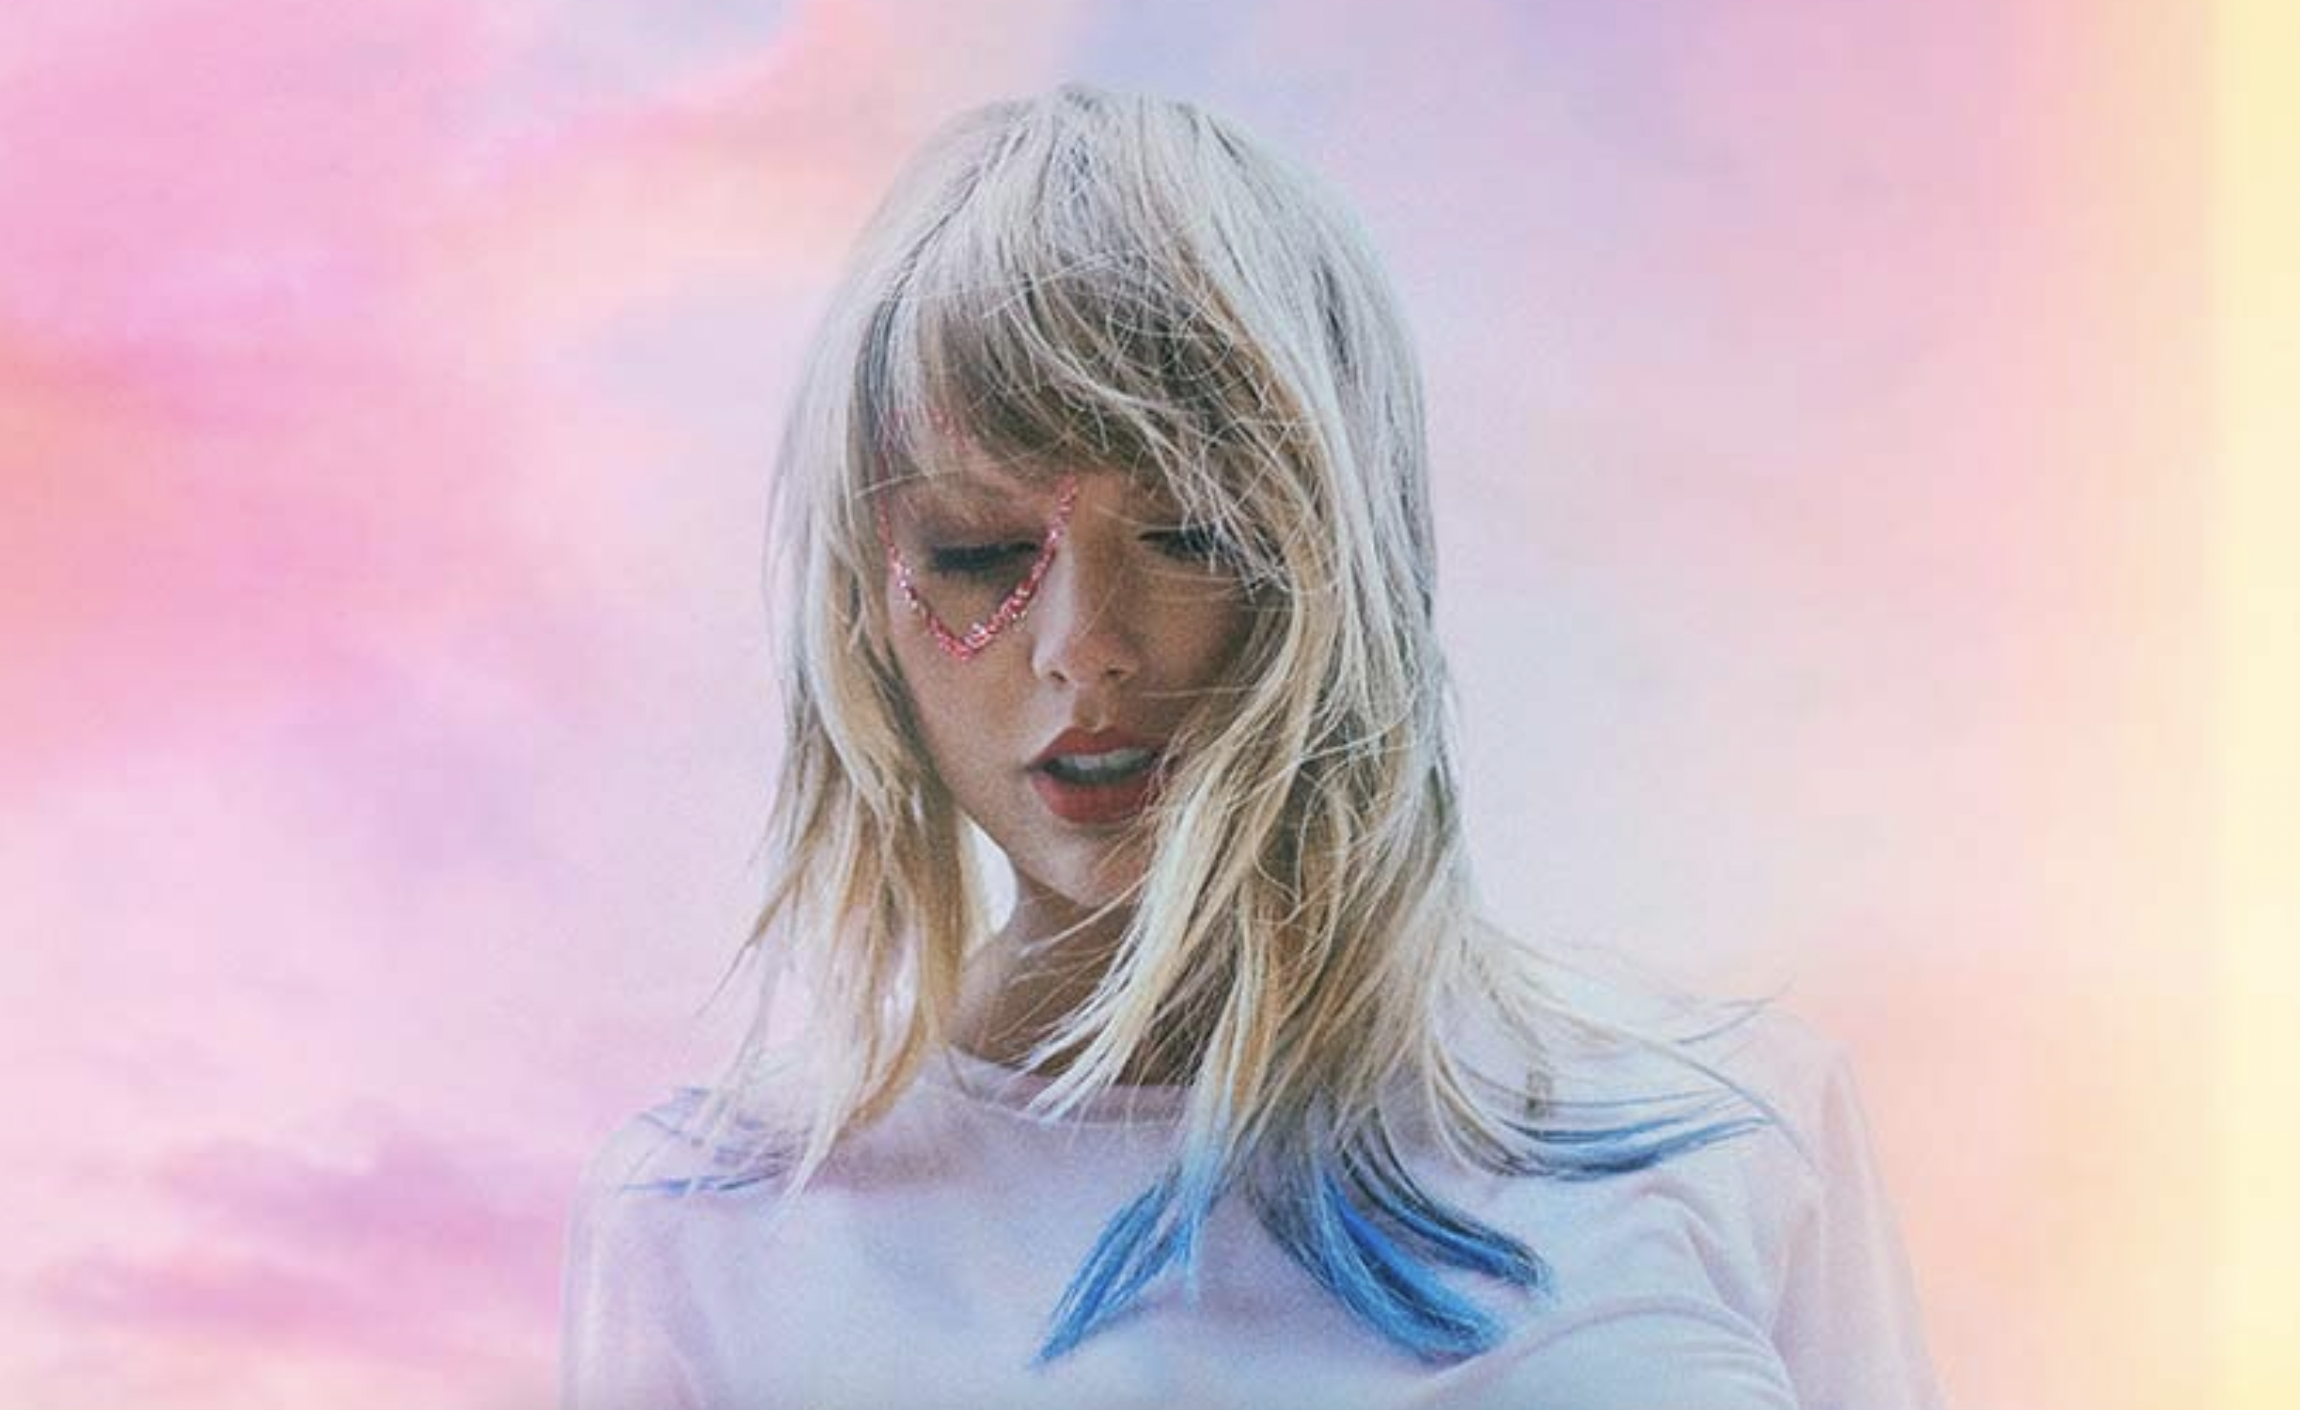 The cover for "Lover" a studio album by Taylor Swift